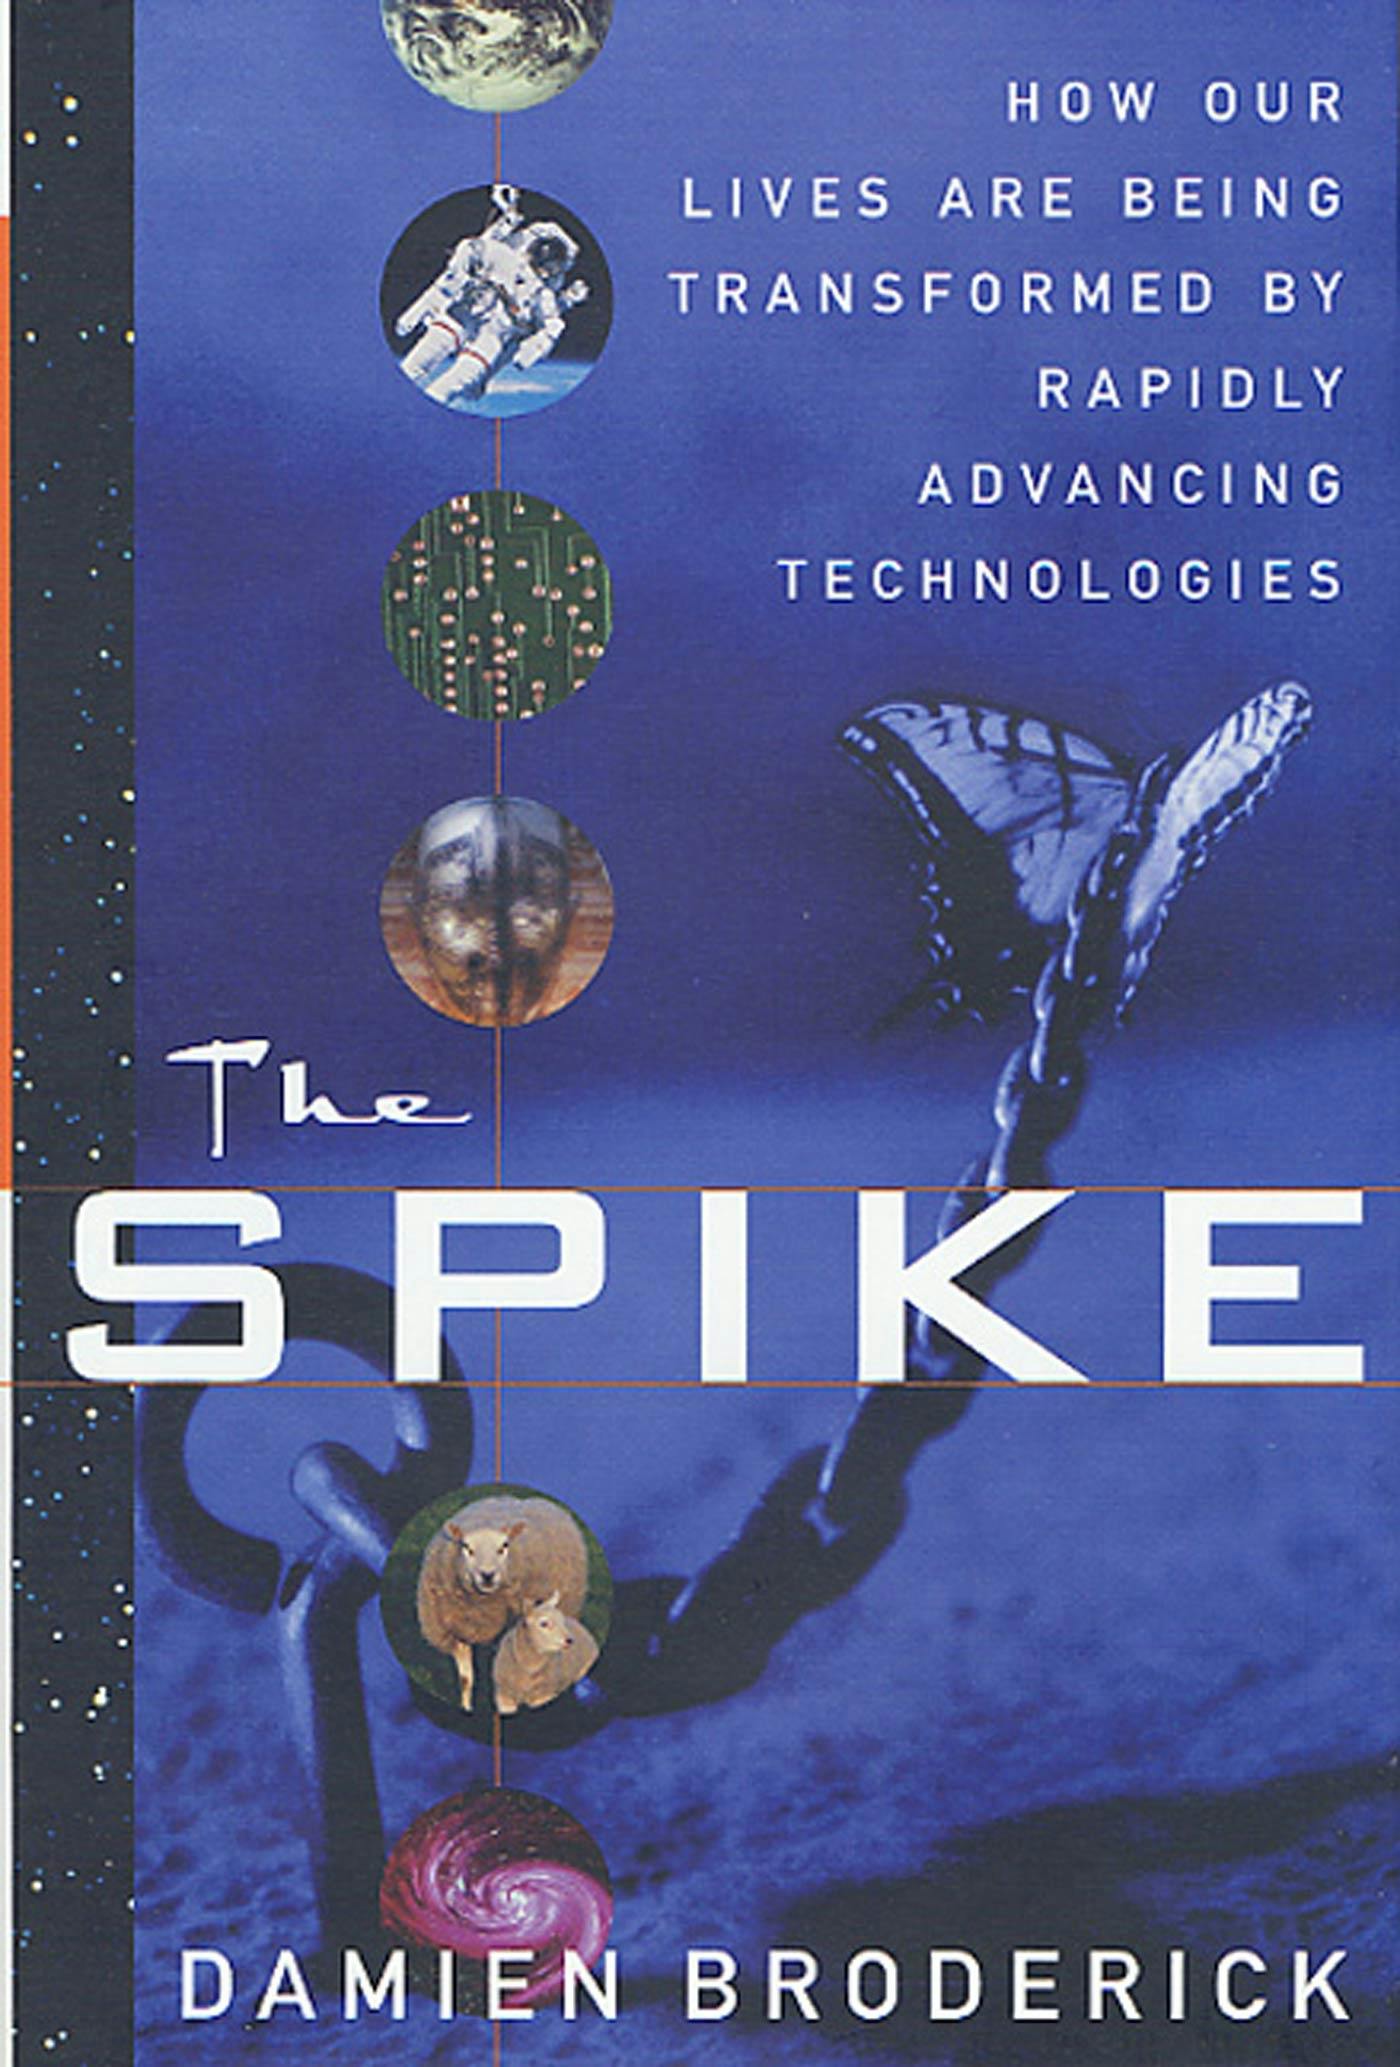 Cover for the book titled as: The Spike